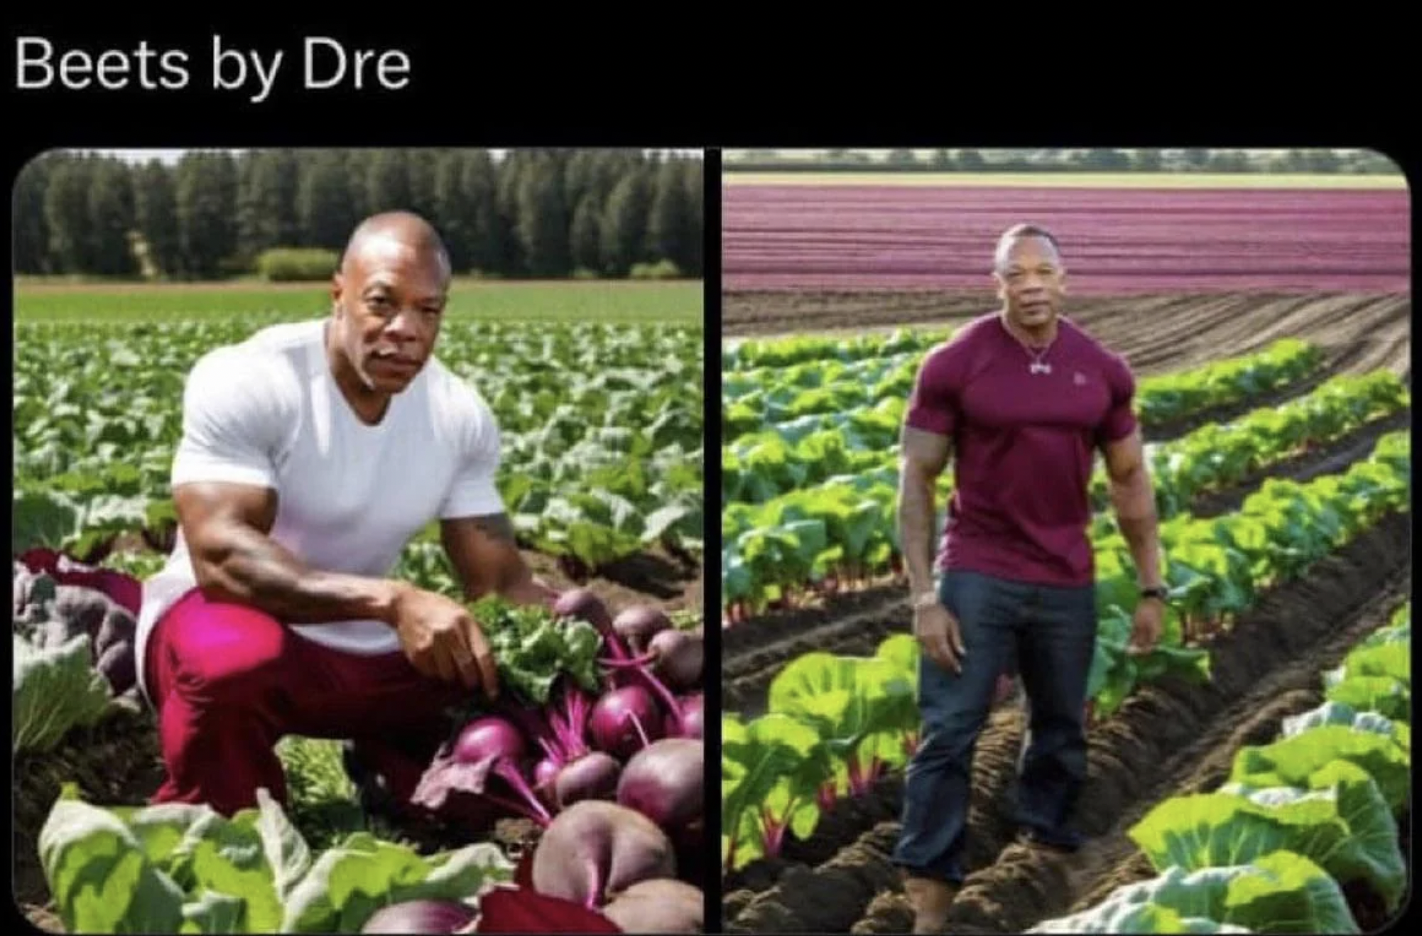 local food - Beets by Dre